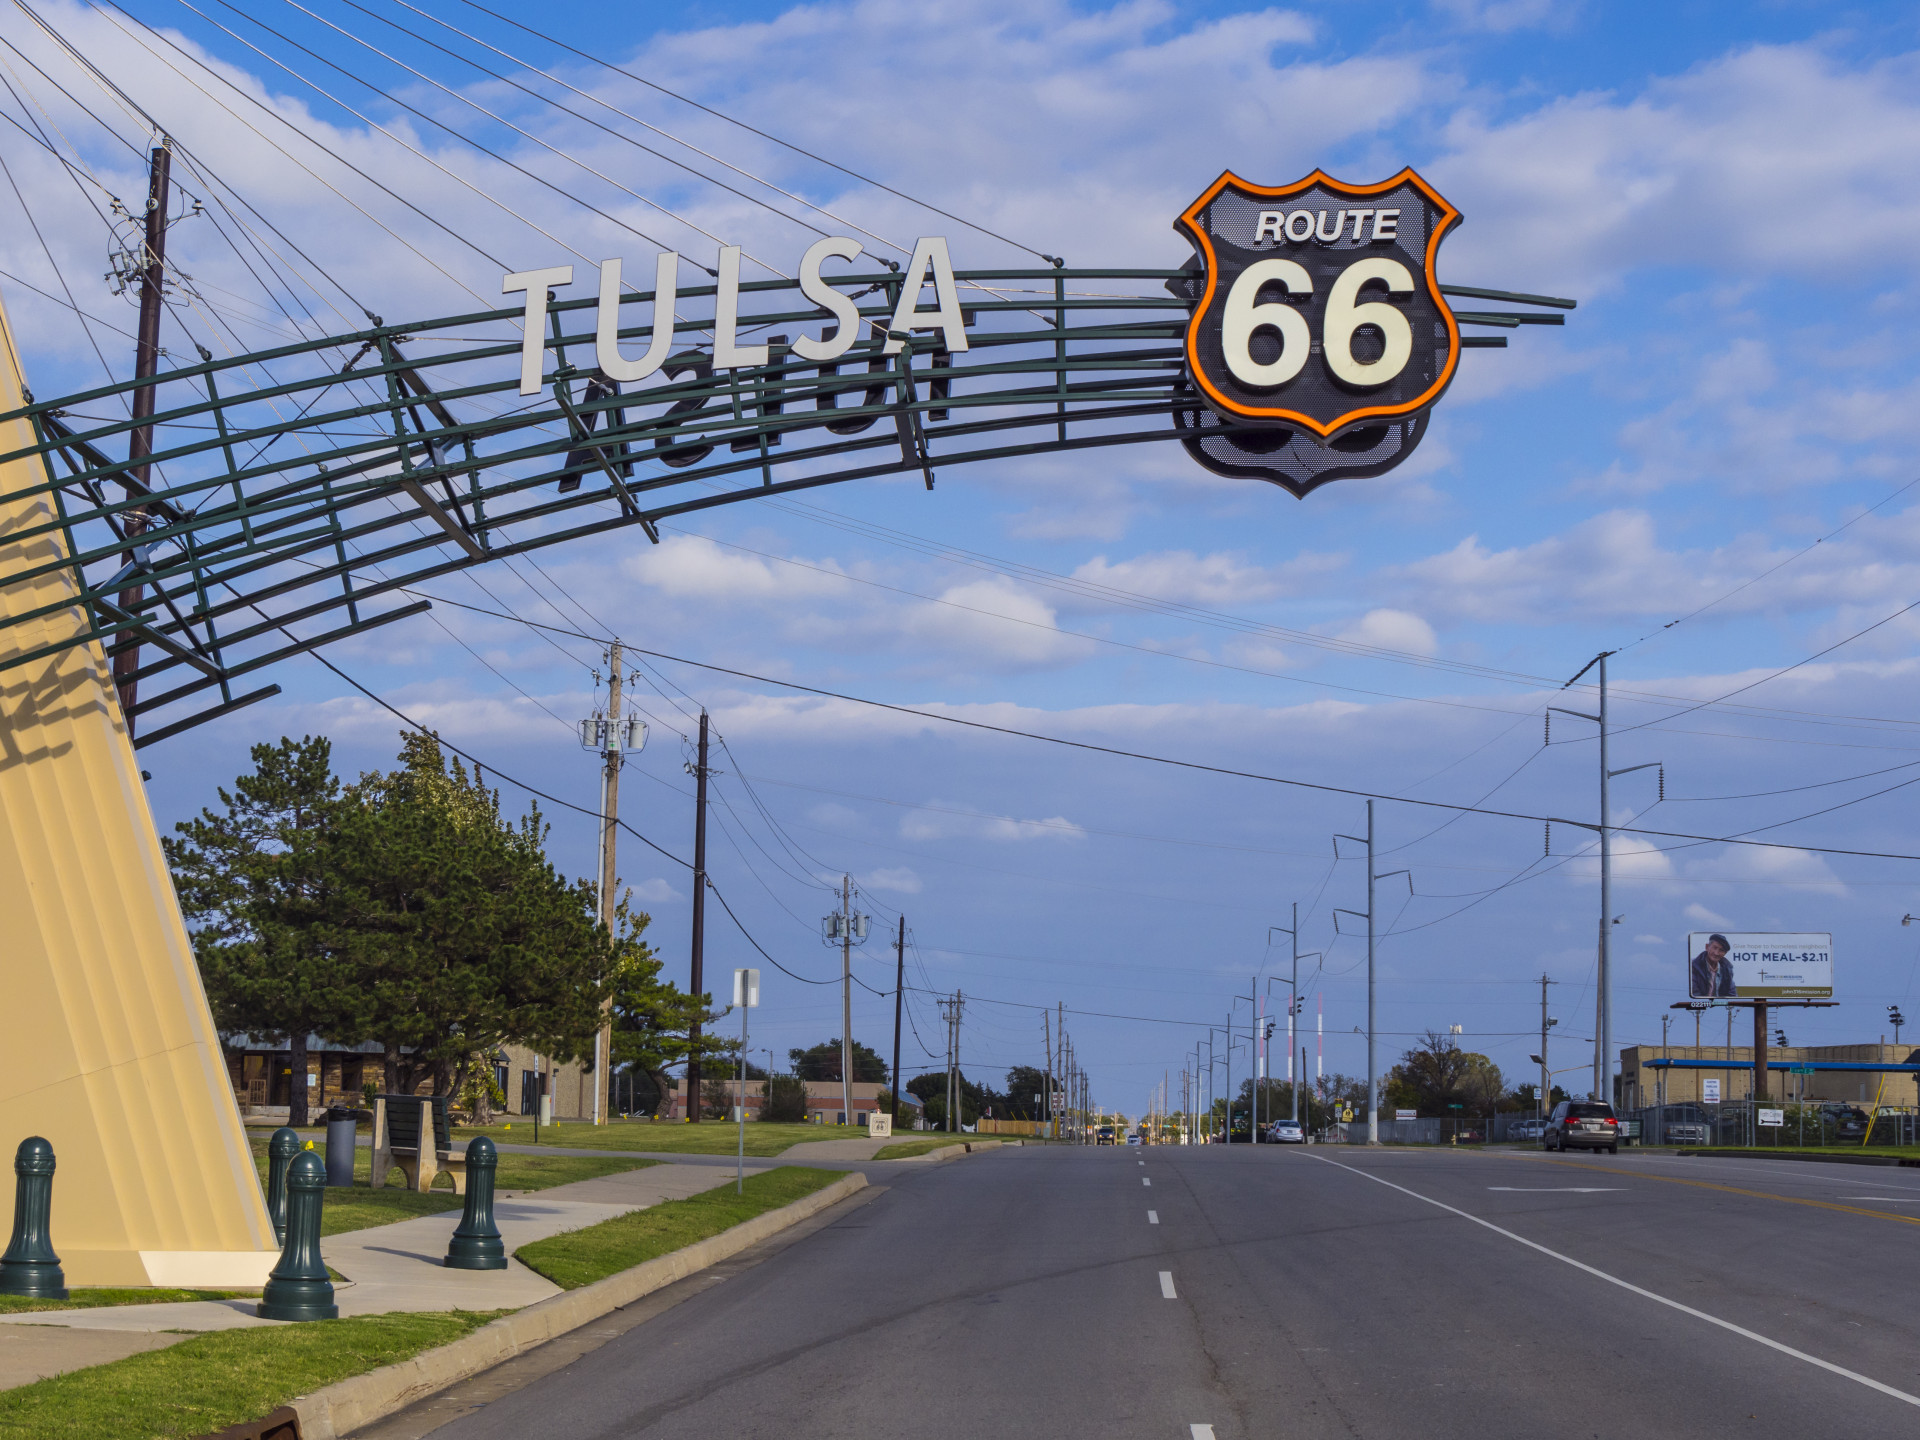 The famous Route 66 Gate in Tulsa.